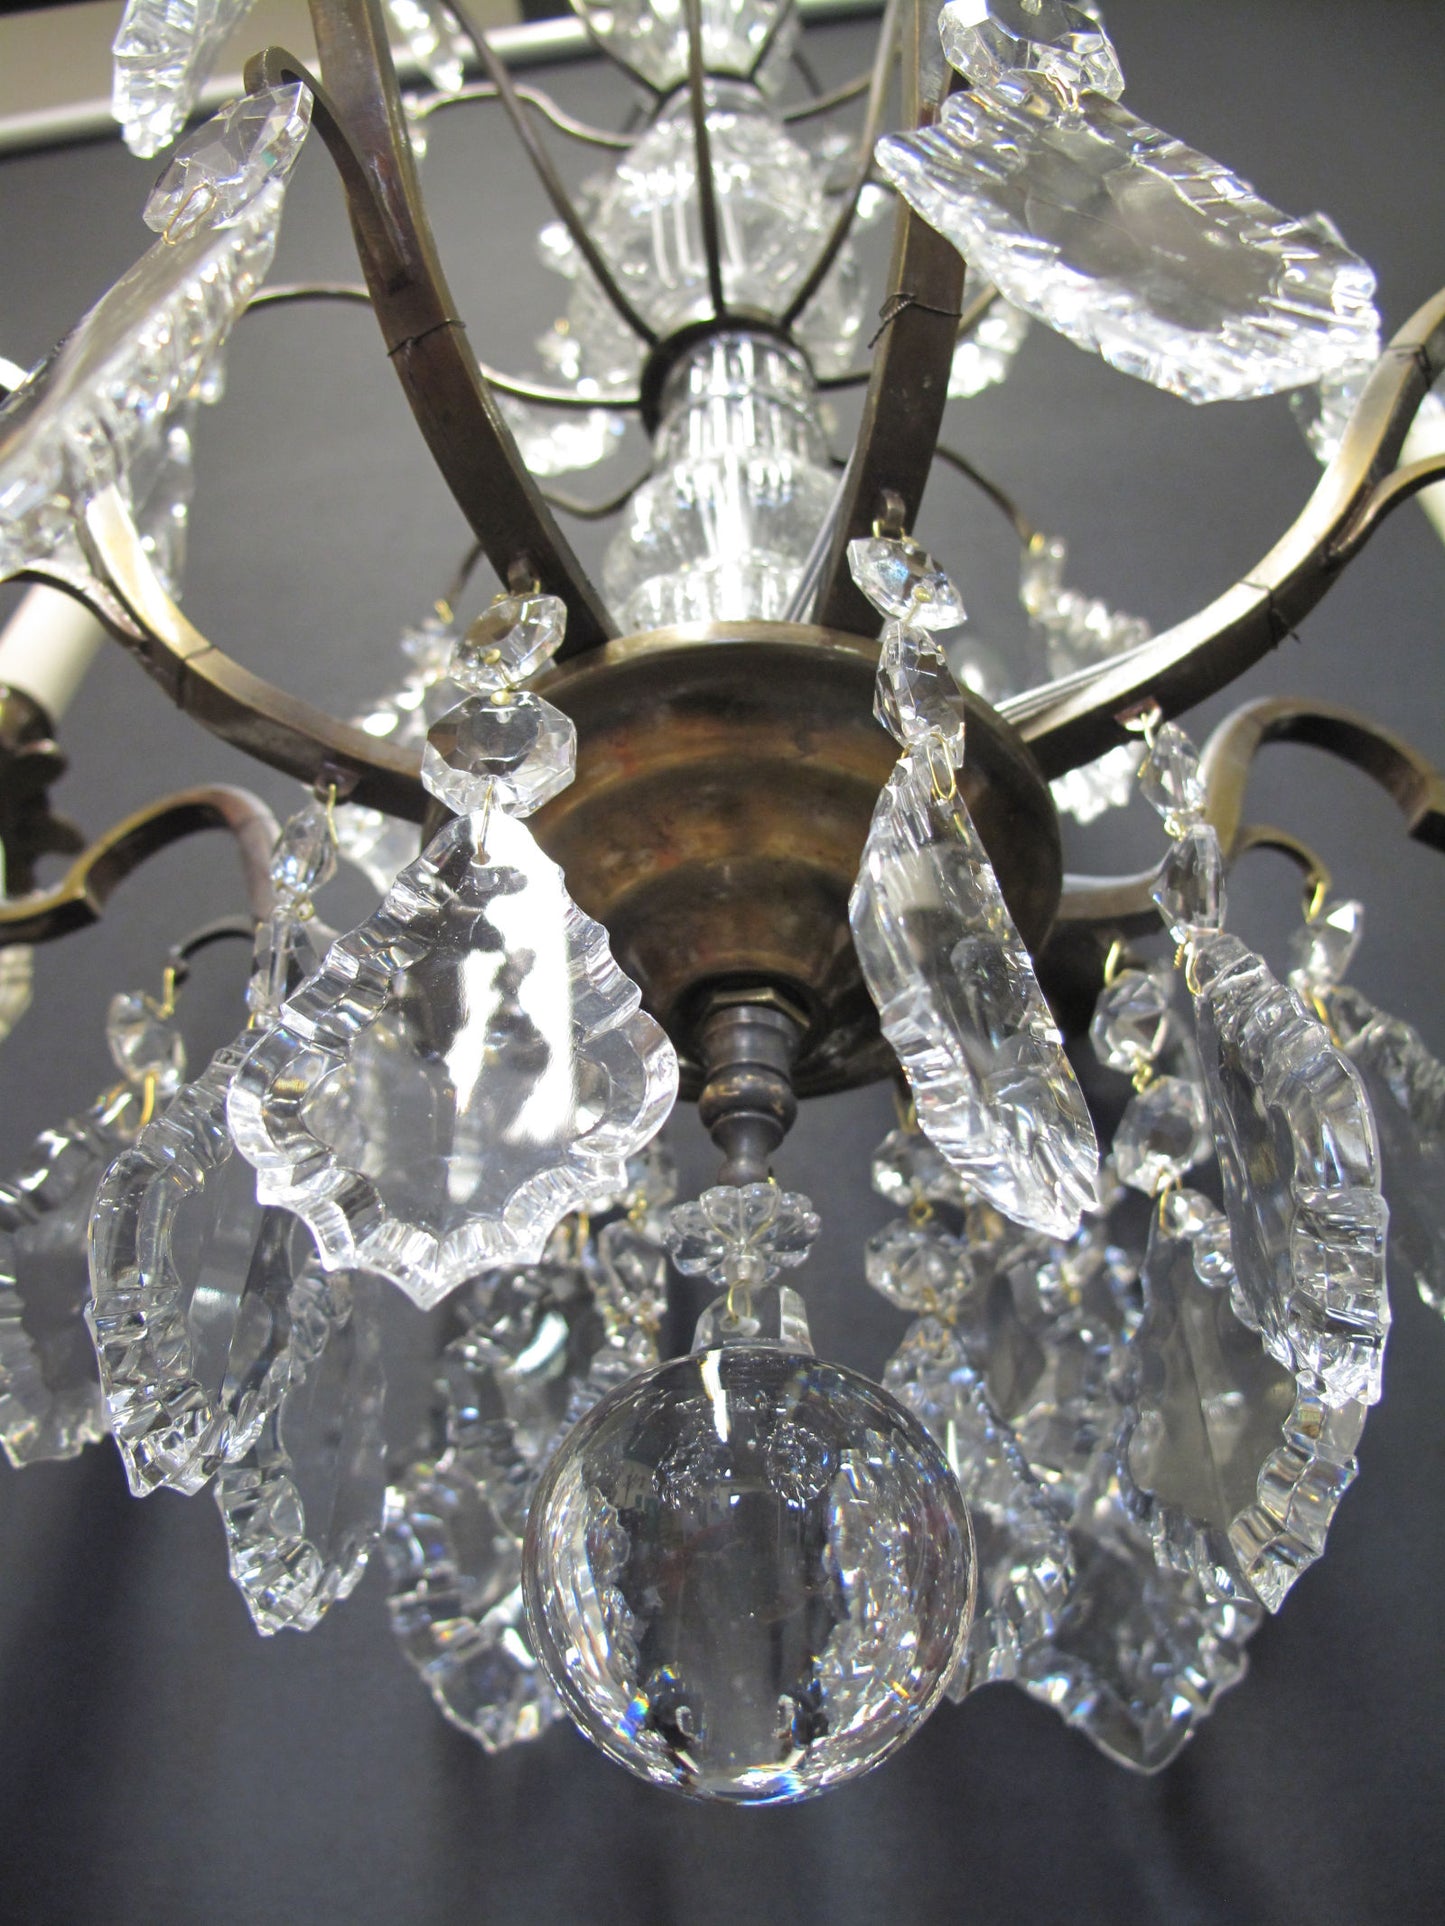 view of glass surrounding bubble of chandelier